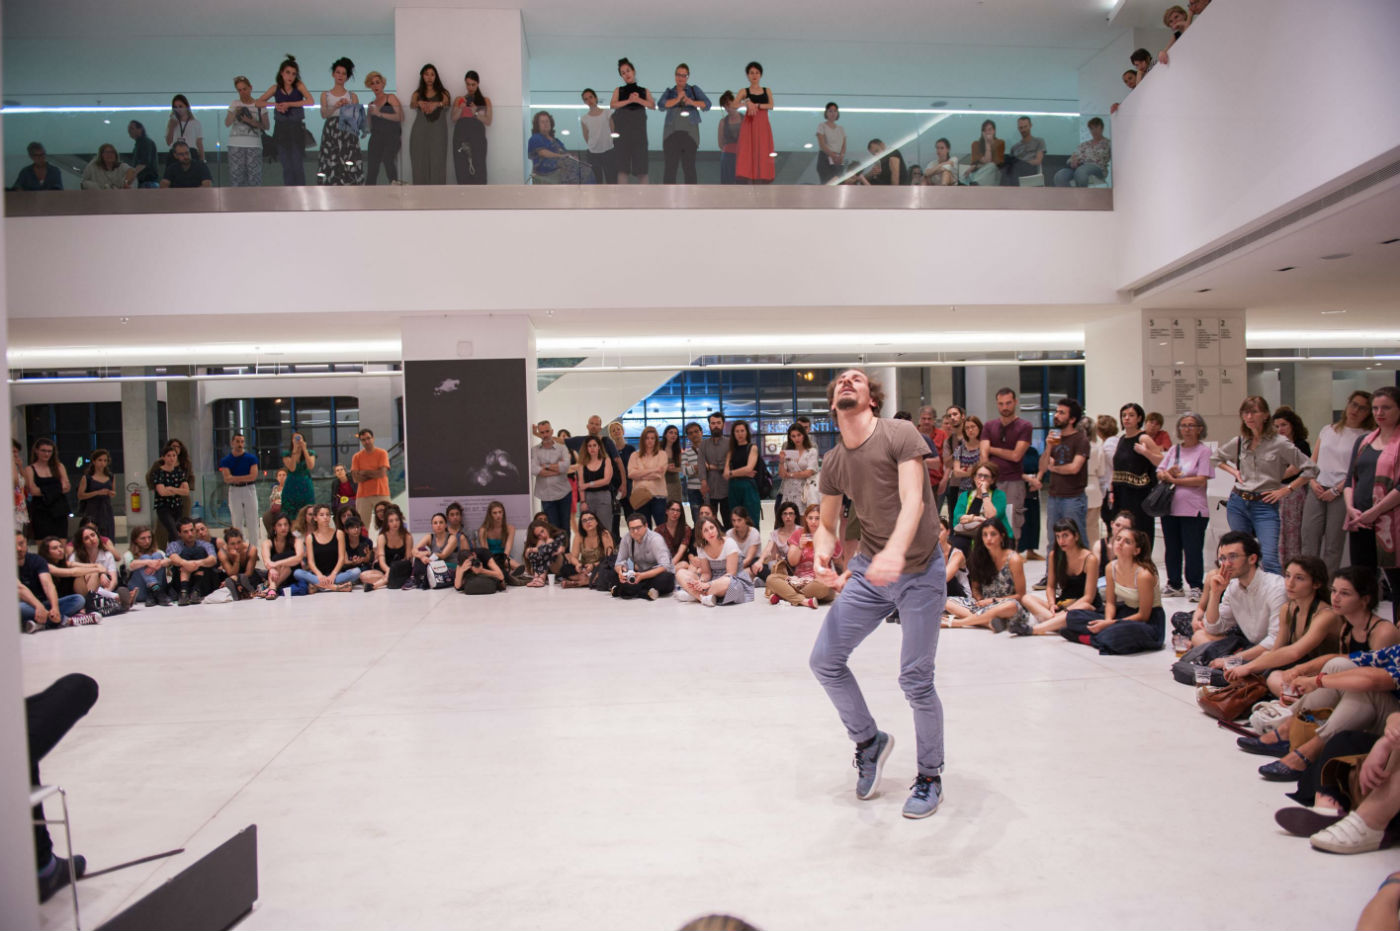  A person is dancing, surrounded by a number of people sitting or standing and watching them. 